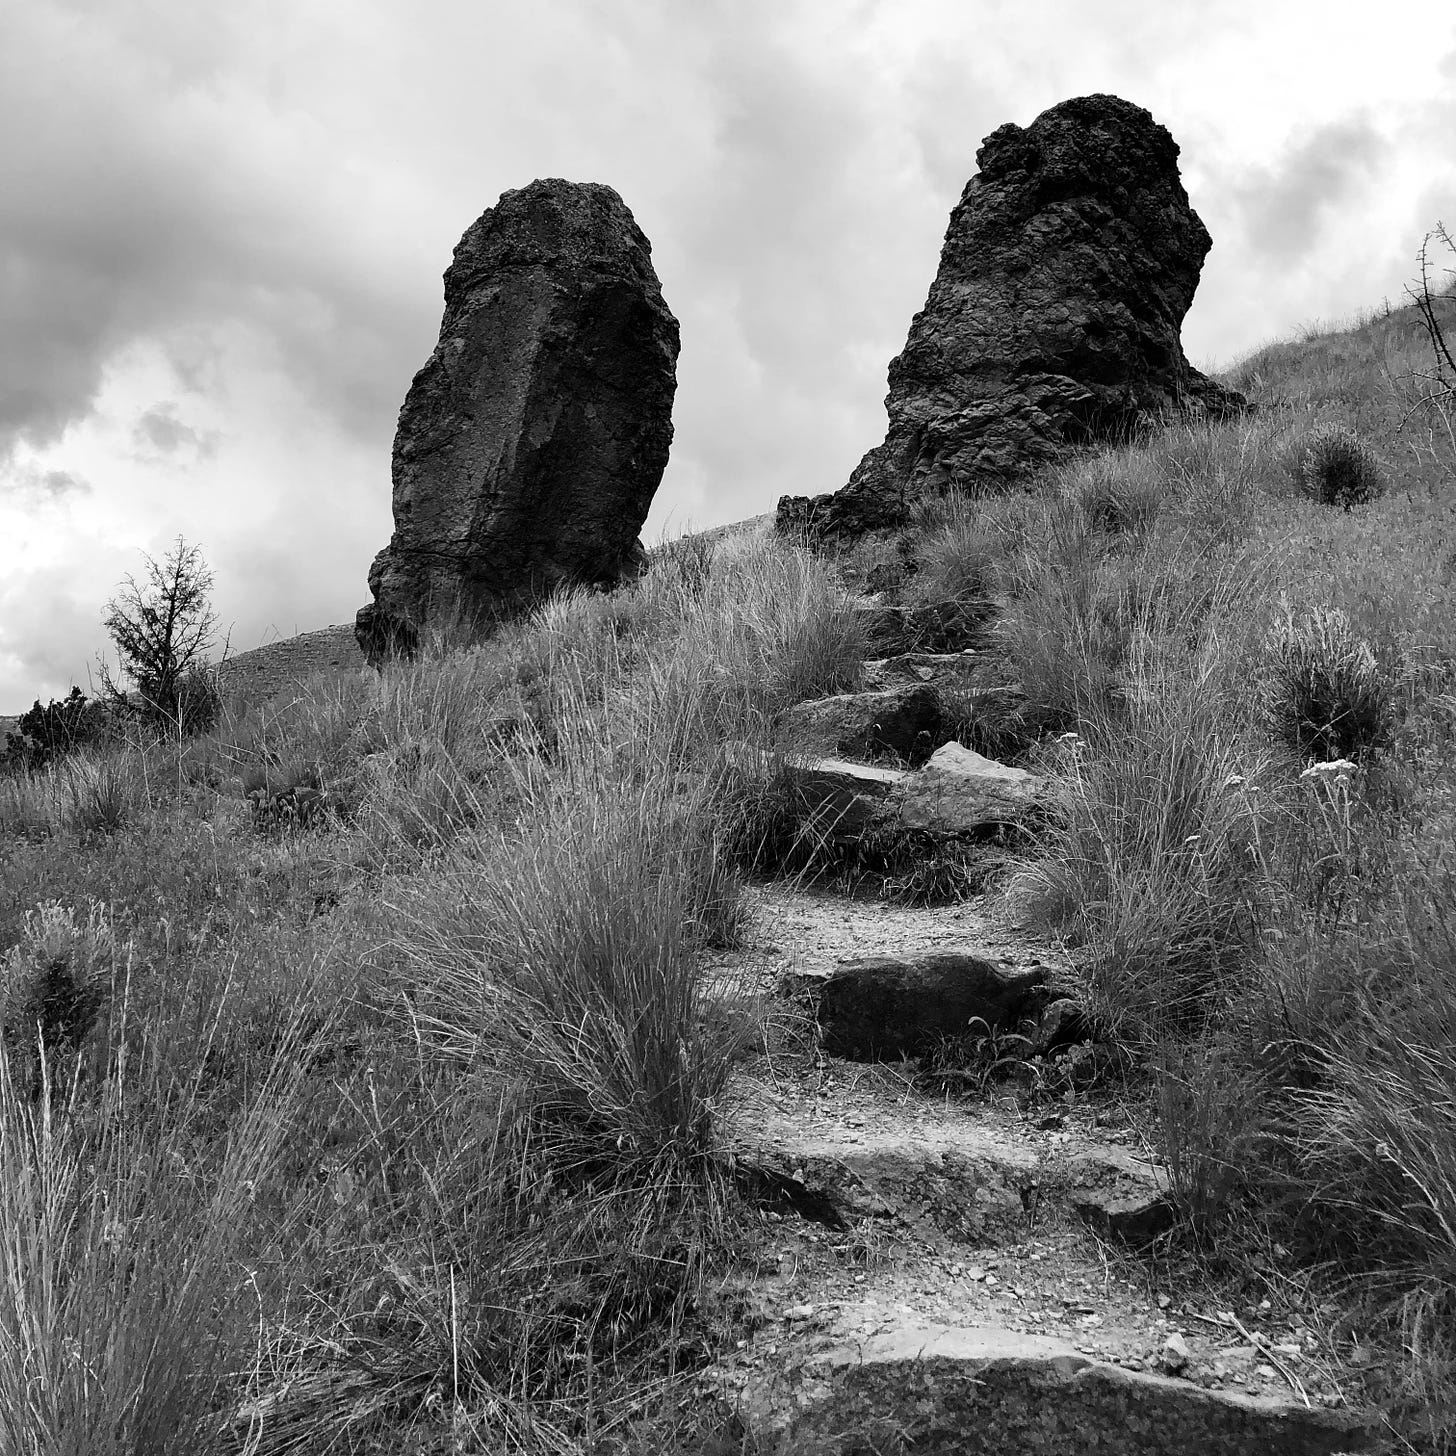 Black and white close-up of hillside with crude steps leading toward two vertical rocks standing alone, like a gateway